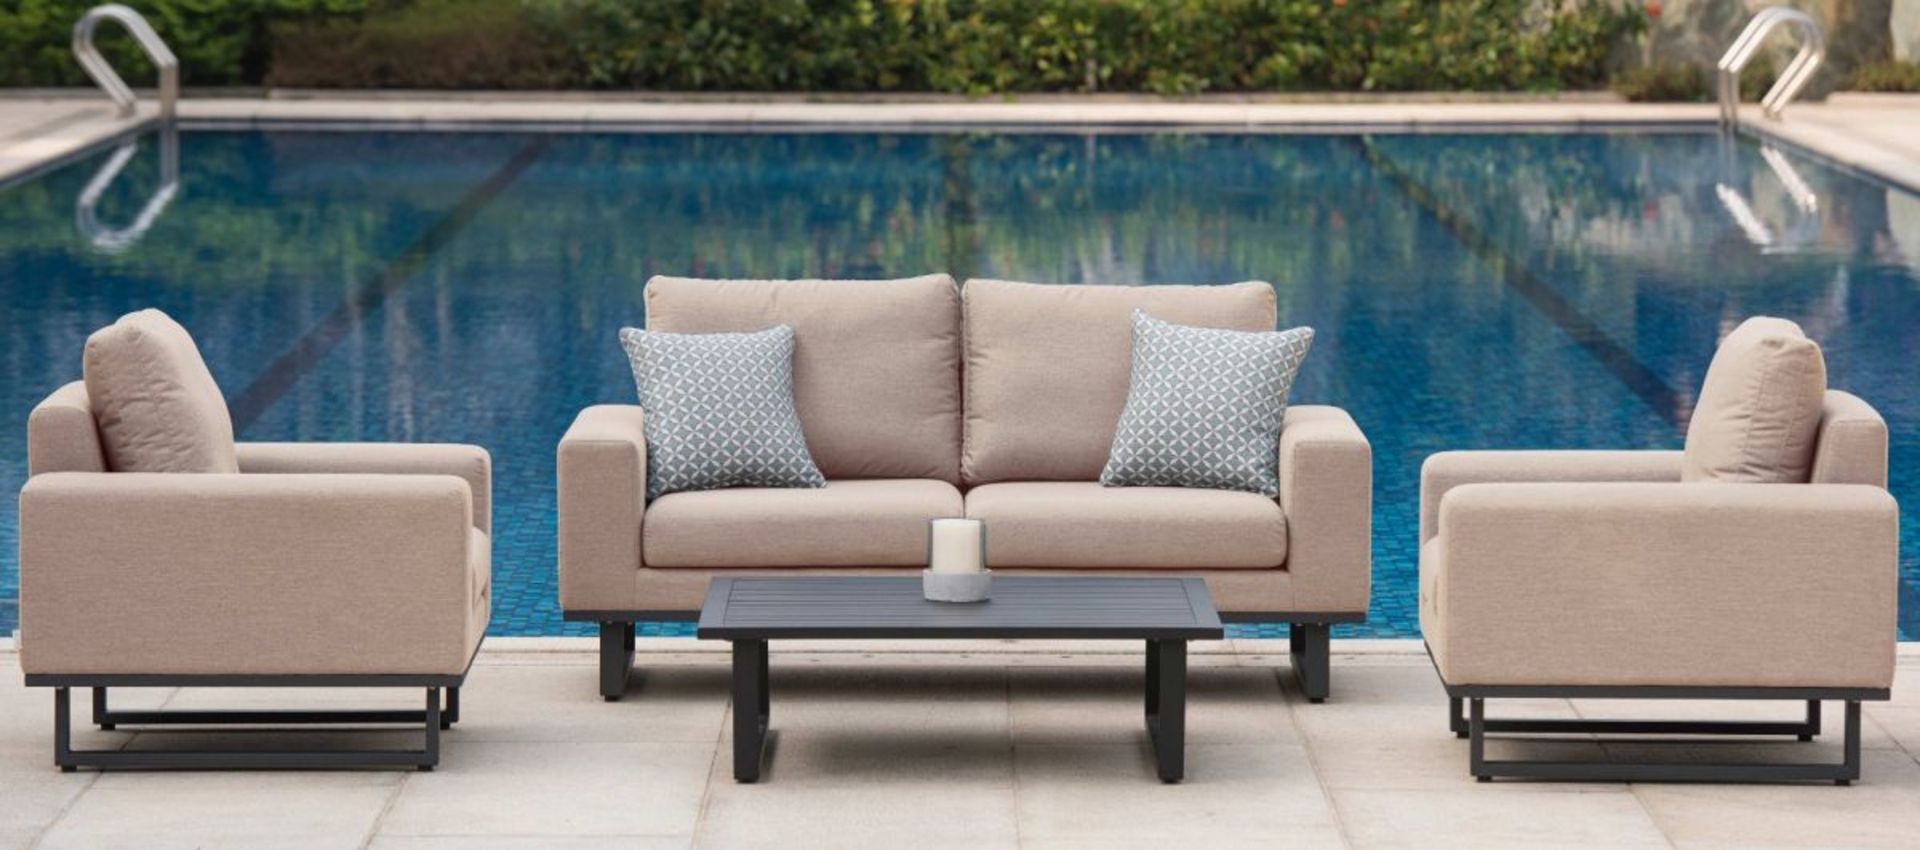 Ethos Outdoor 2 Seat Sofa Set With Coffee Table (Taupe) *BRAND NEW* - Image 4 of 8